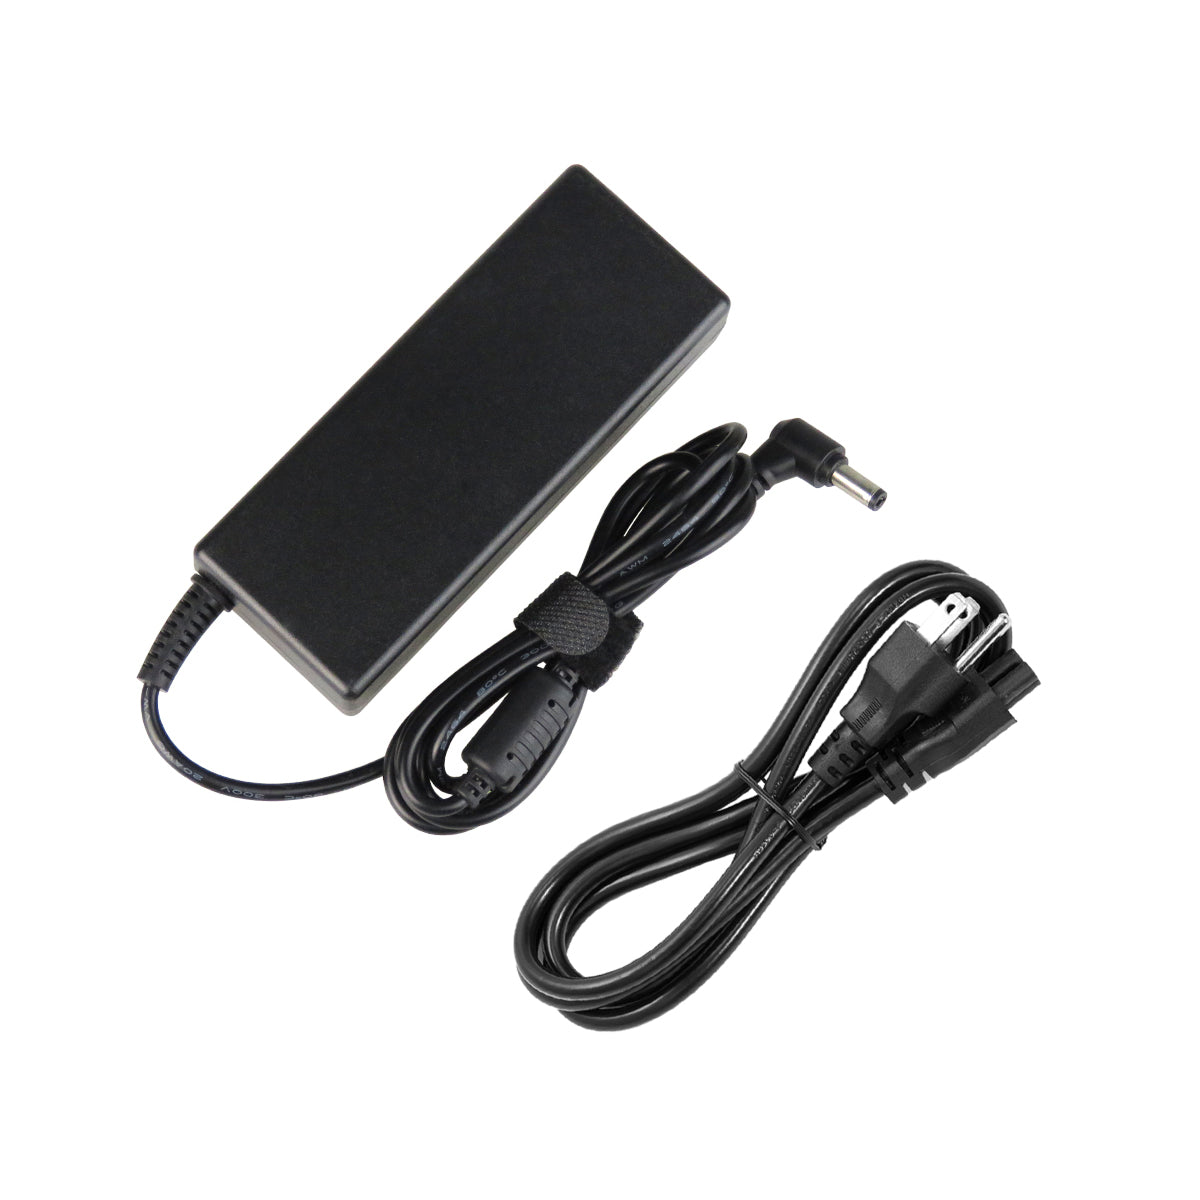 AC Adapter Charger for ASUS X54C-BBK21 Notebook.